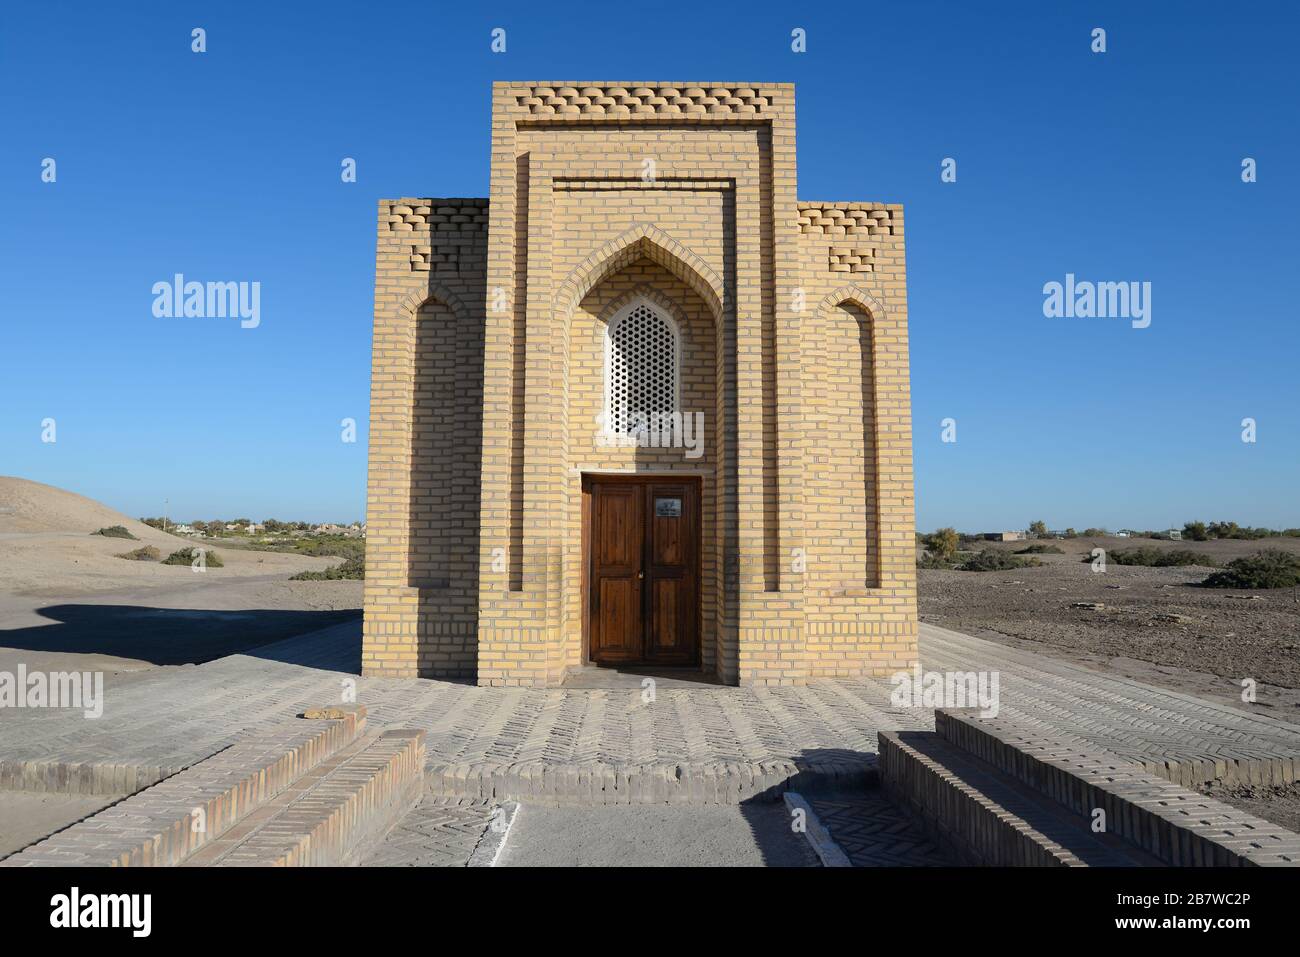 Alow Pir shrine, part of the capital of Khwarazm in the Achaemenid Empire, the first Persian Empire. Located nowadays in Kunya Urgench, Turkmenistan. Stock Photo